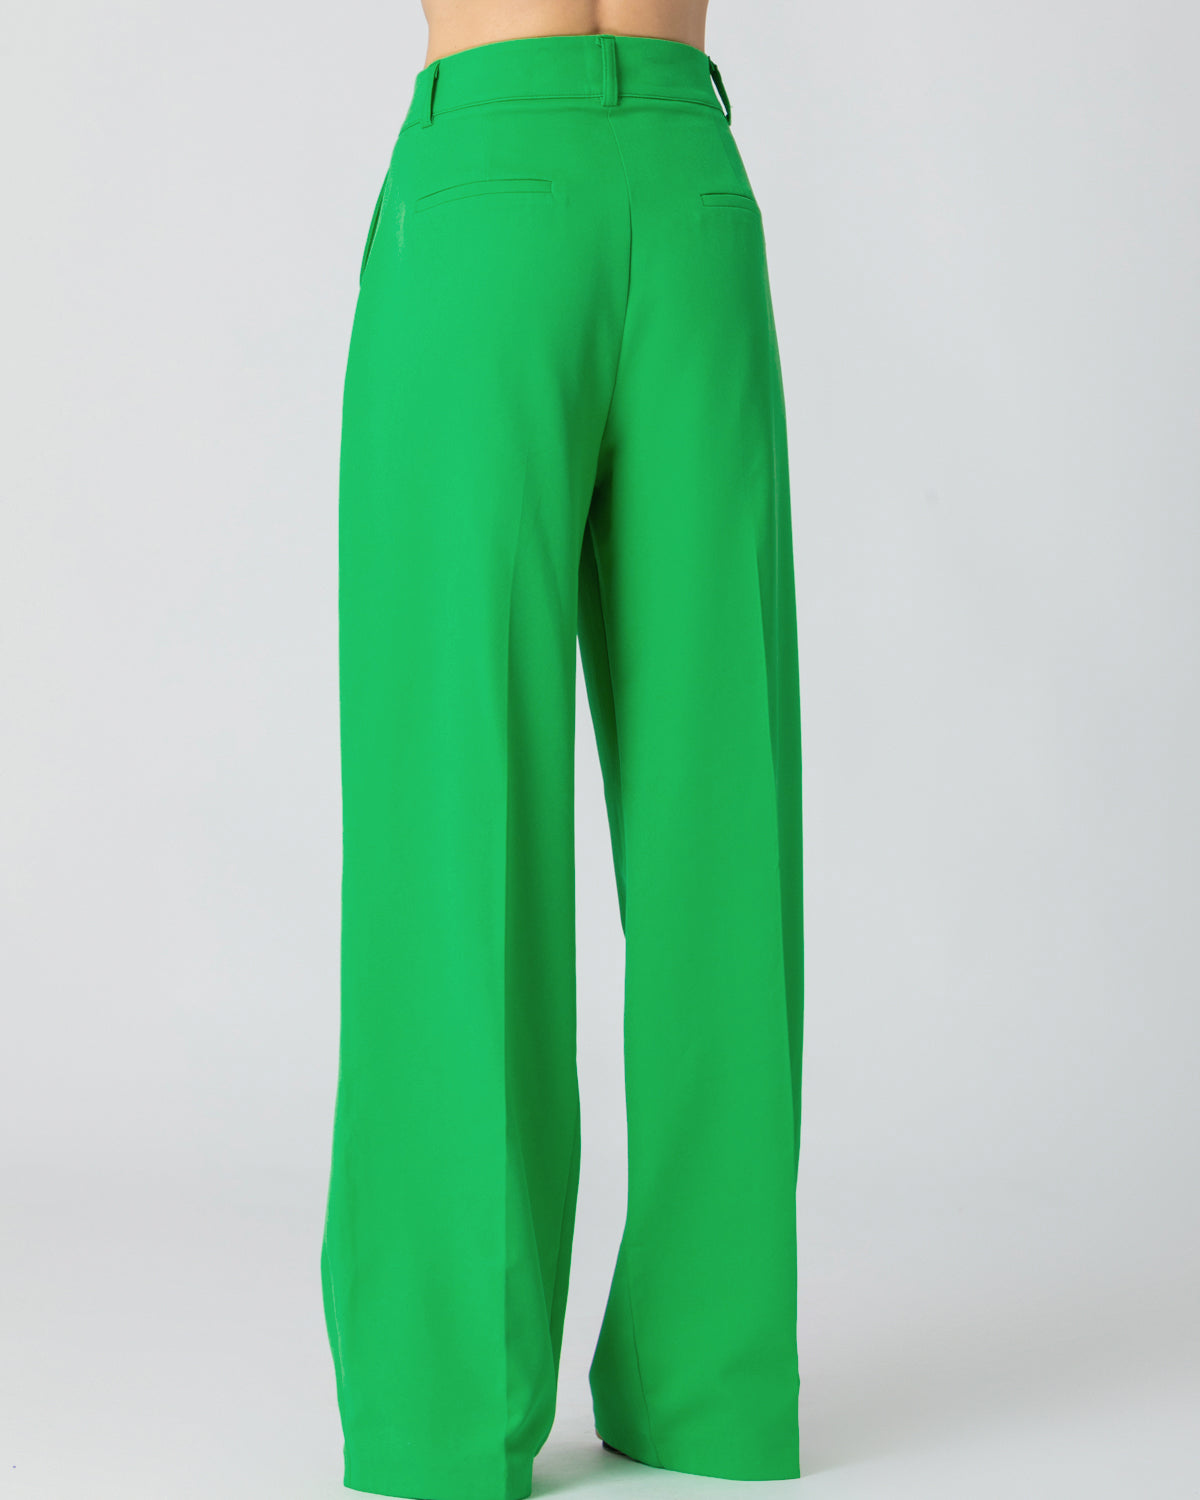 High-waisted trousers - Anna shoes & more